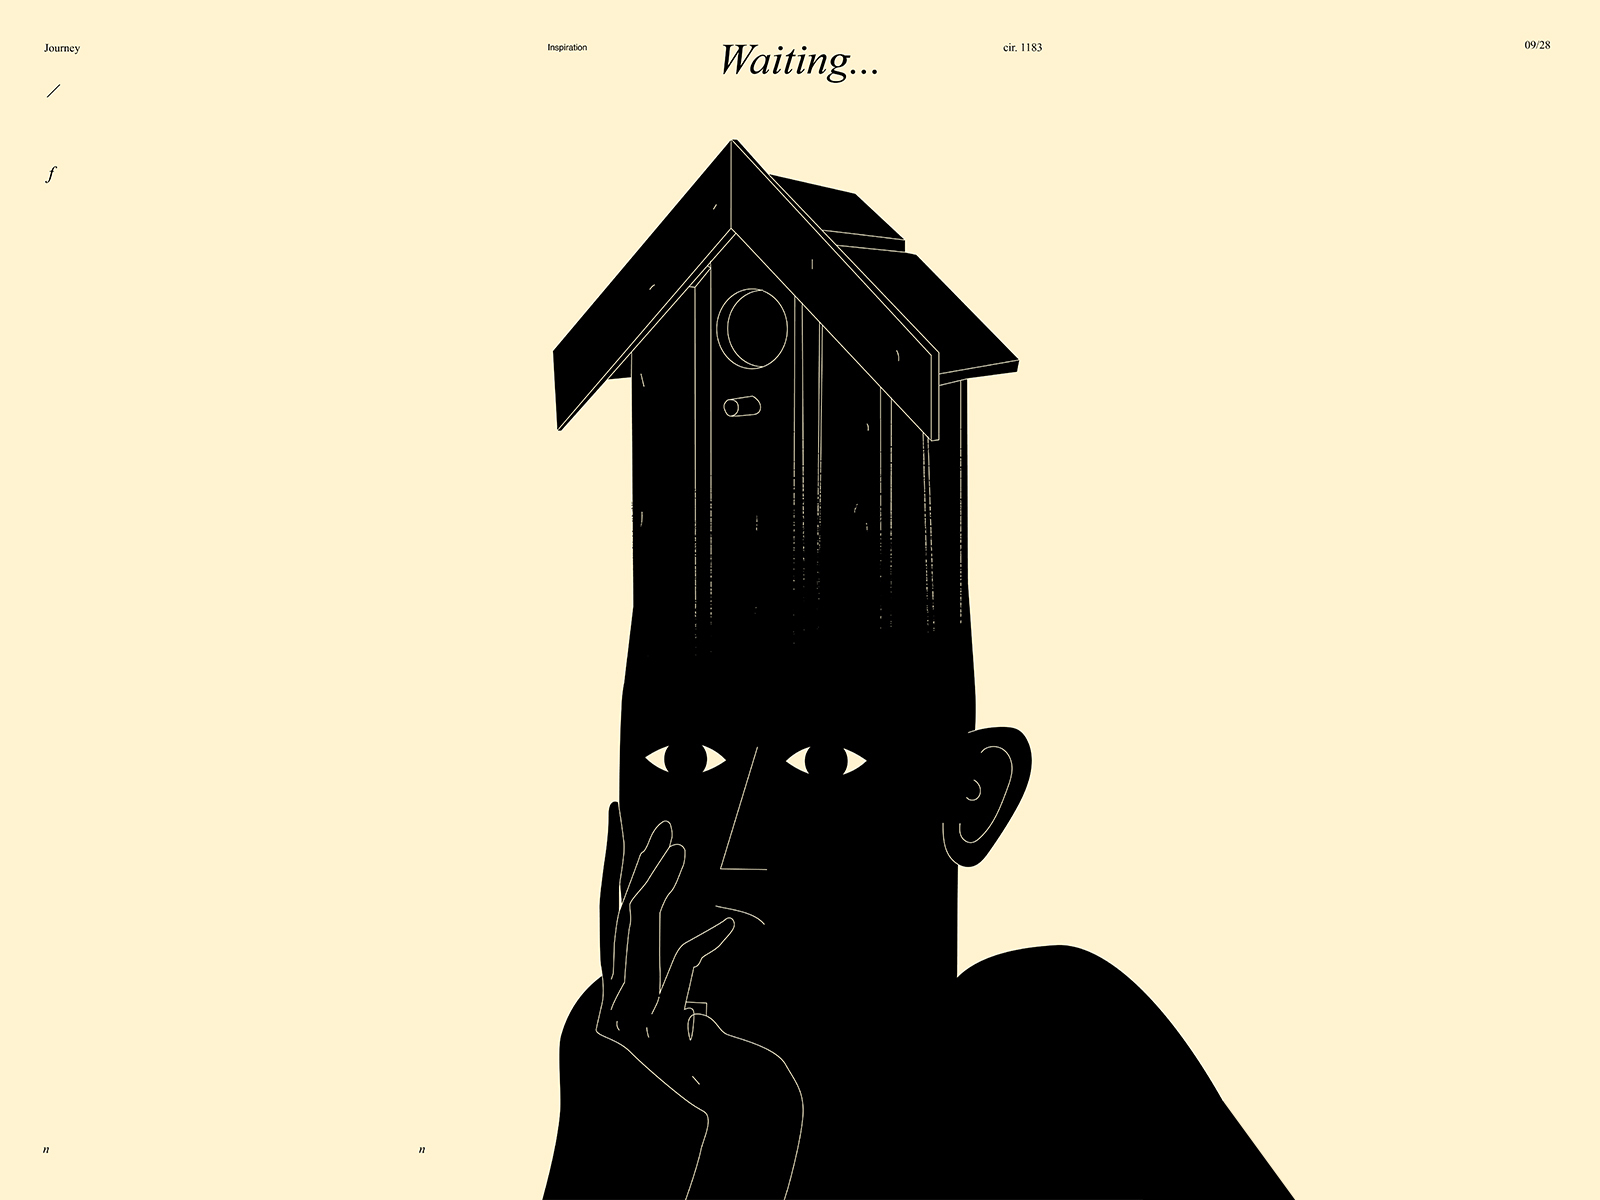 Waiting abstract bird house character composition conceptual illustration design dual meaning editorial illustration hand illustration idea illustration laconic lines minimal poster thinking waiting